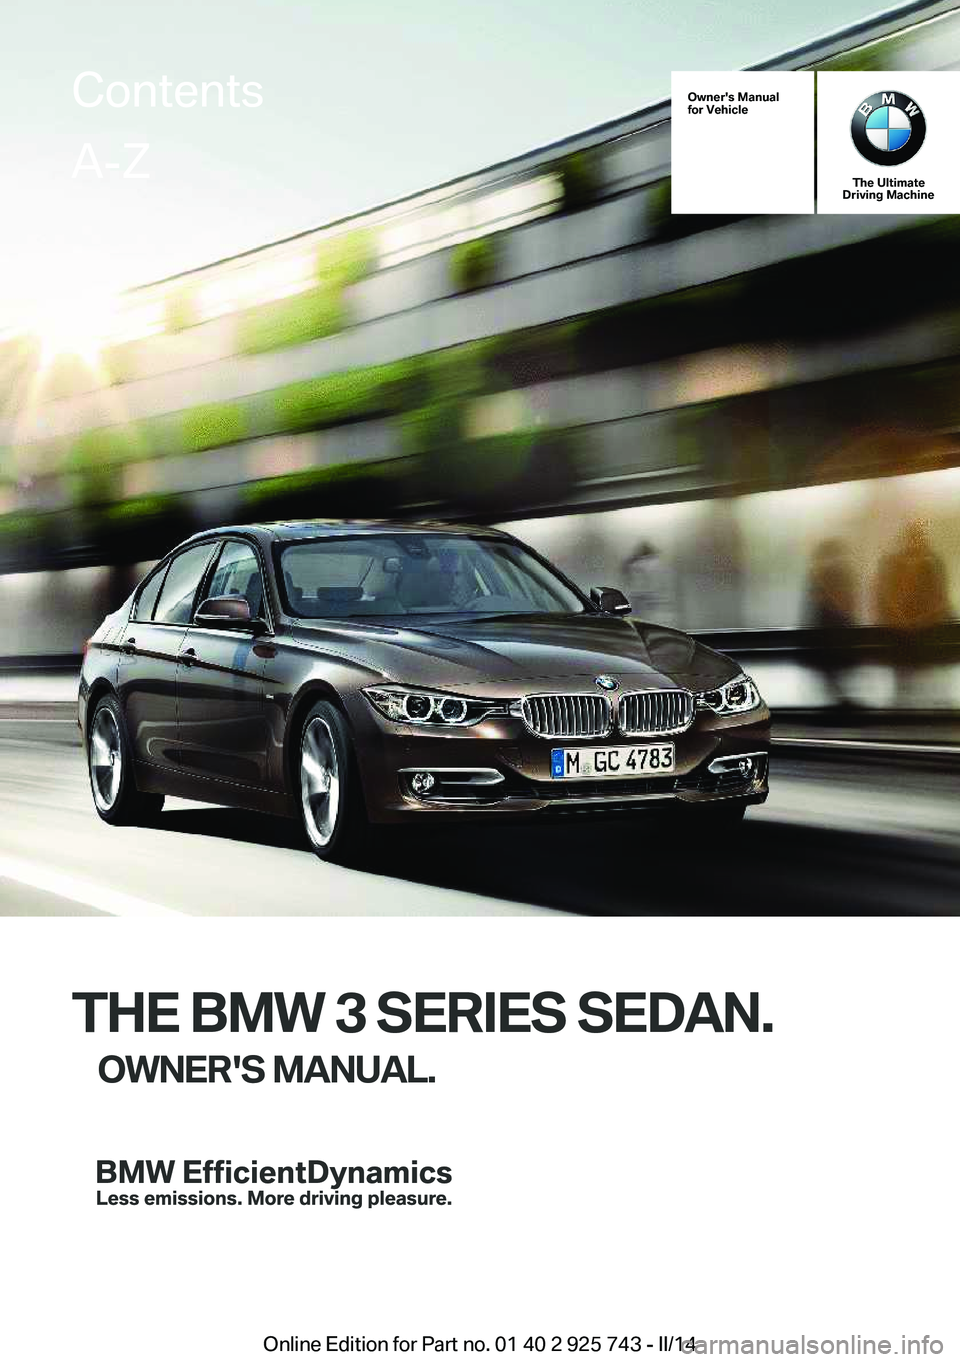 BMW 320I XDRIVE 2014  Owners Manual Owner's Manual
for Vehicle
The Ultimate
Driving Machine
THE BMW 3 SERIES SEDAN.
OWNER'S MANUAL.
ContentsA-Z
Online Edition for Part no. 01 40 2 925 743 - II/14   